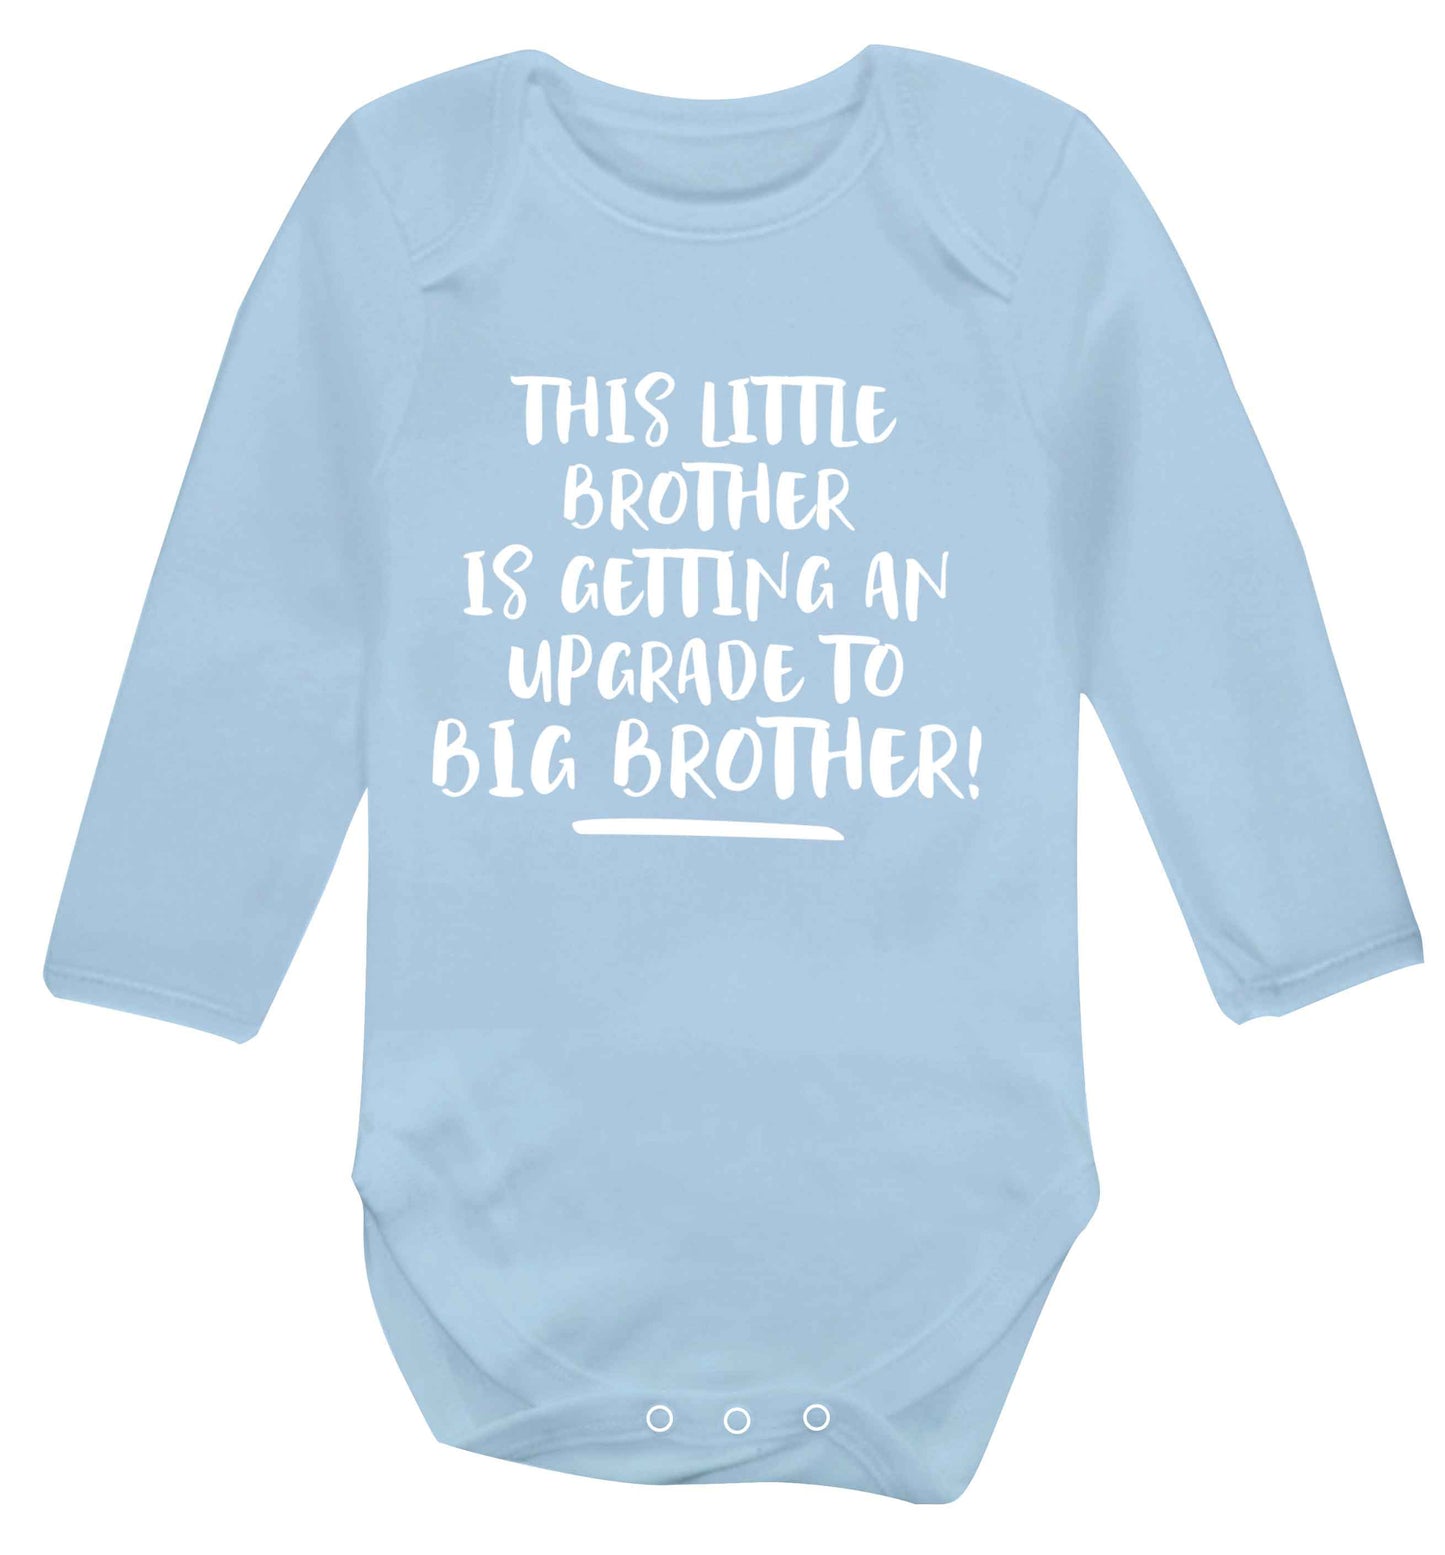 This little brother is getting an upgrade to big brother! Baby Vest long sleeved pale blue 6-12 months